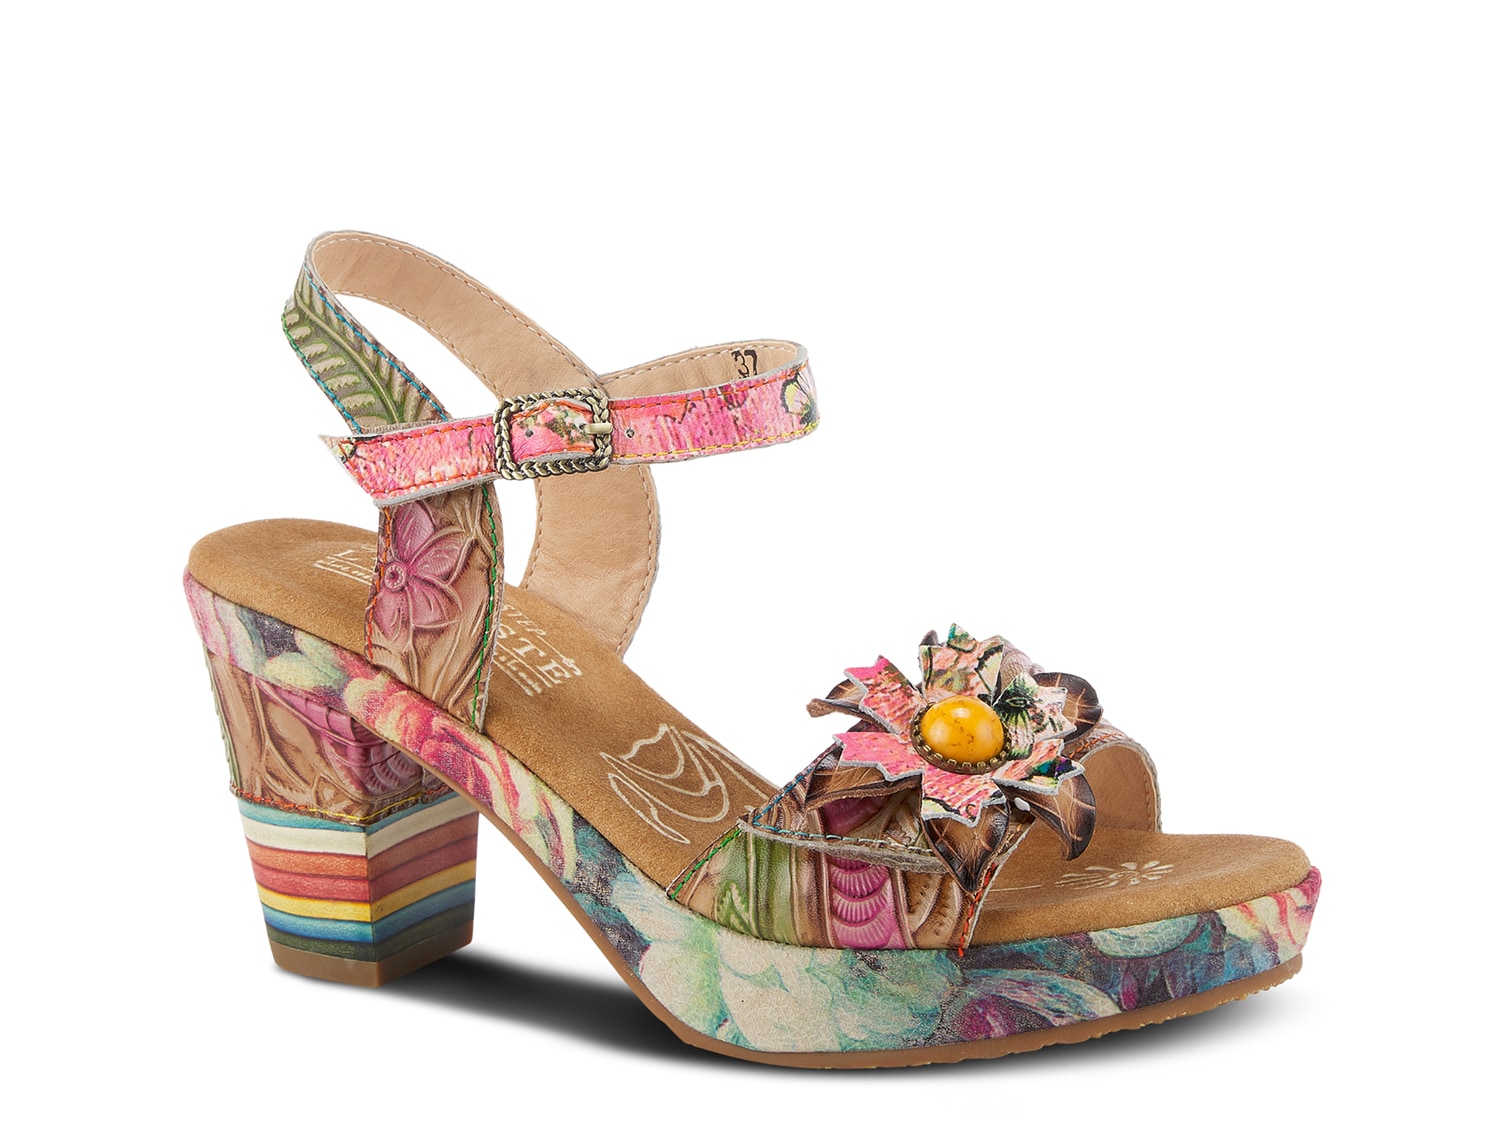 L'Artiste by Spring Step Leilane Sandal - Free Shipping | DSW